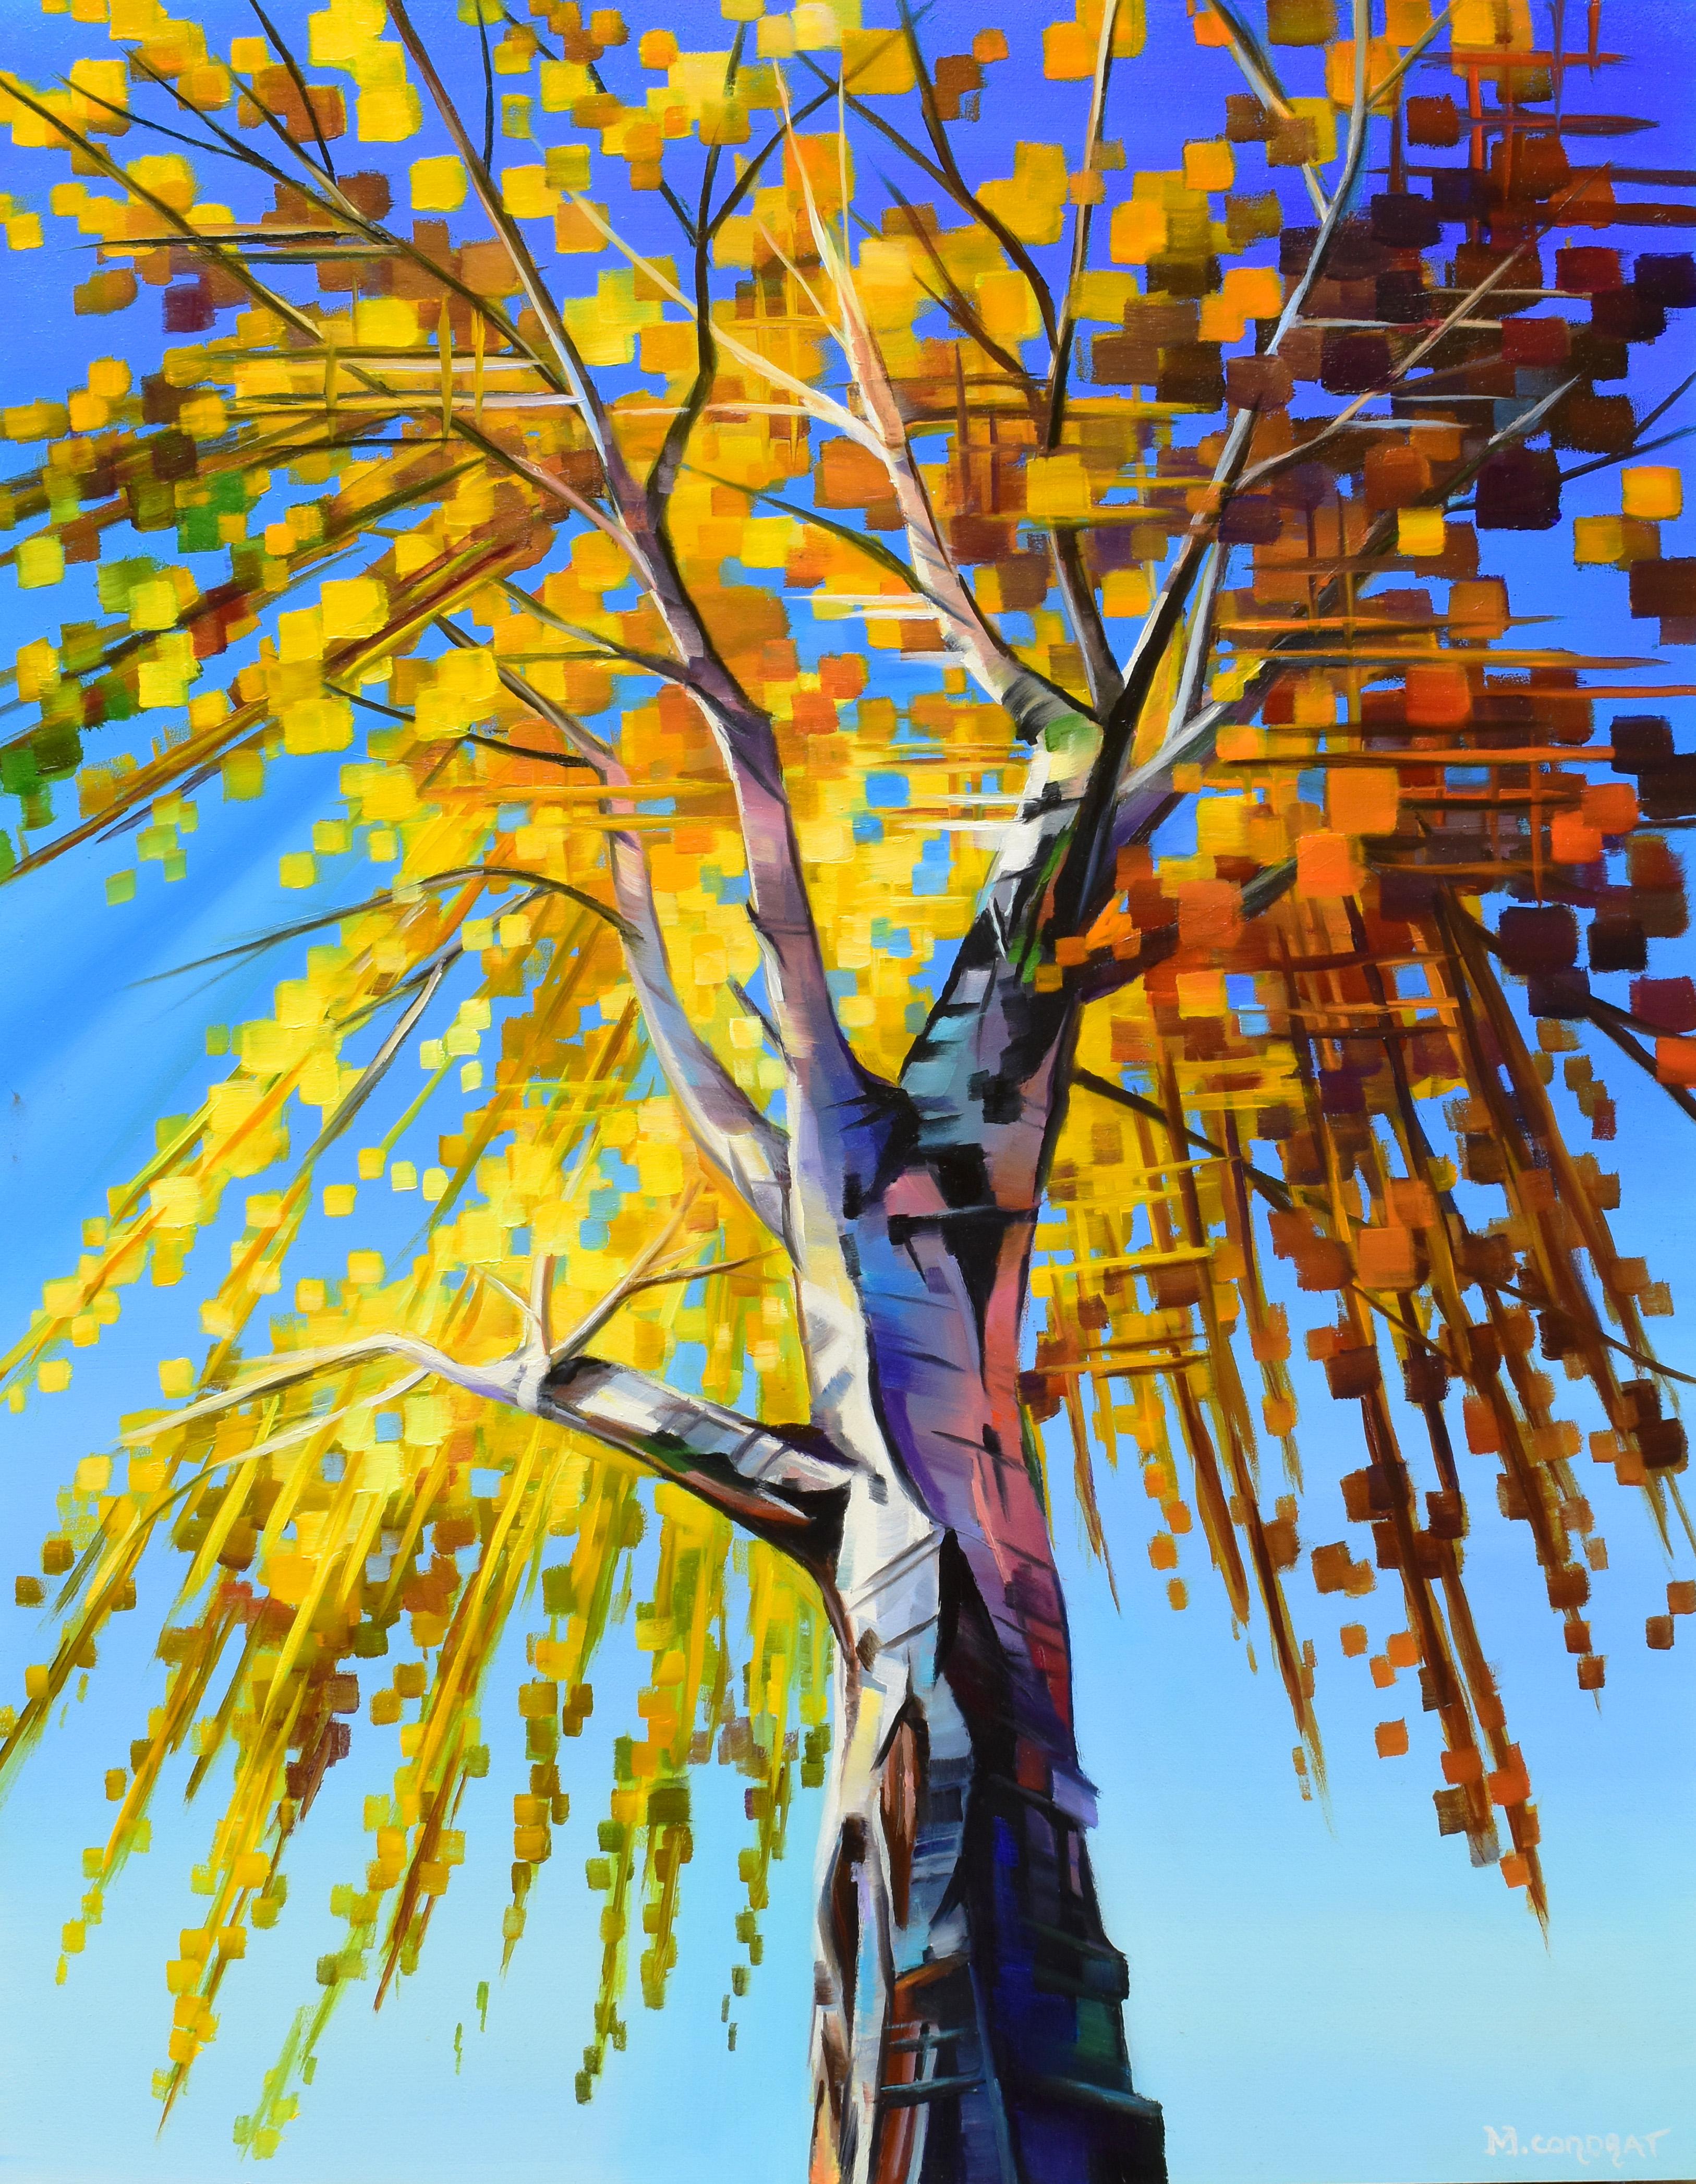 Michelle Condrat Landscape Painting - "Strength and Beauty" - Oil Painting with a Tree Showing Fall Colors